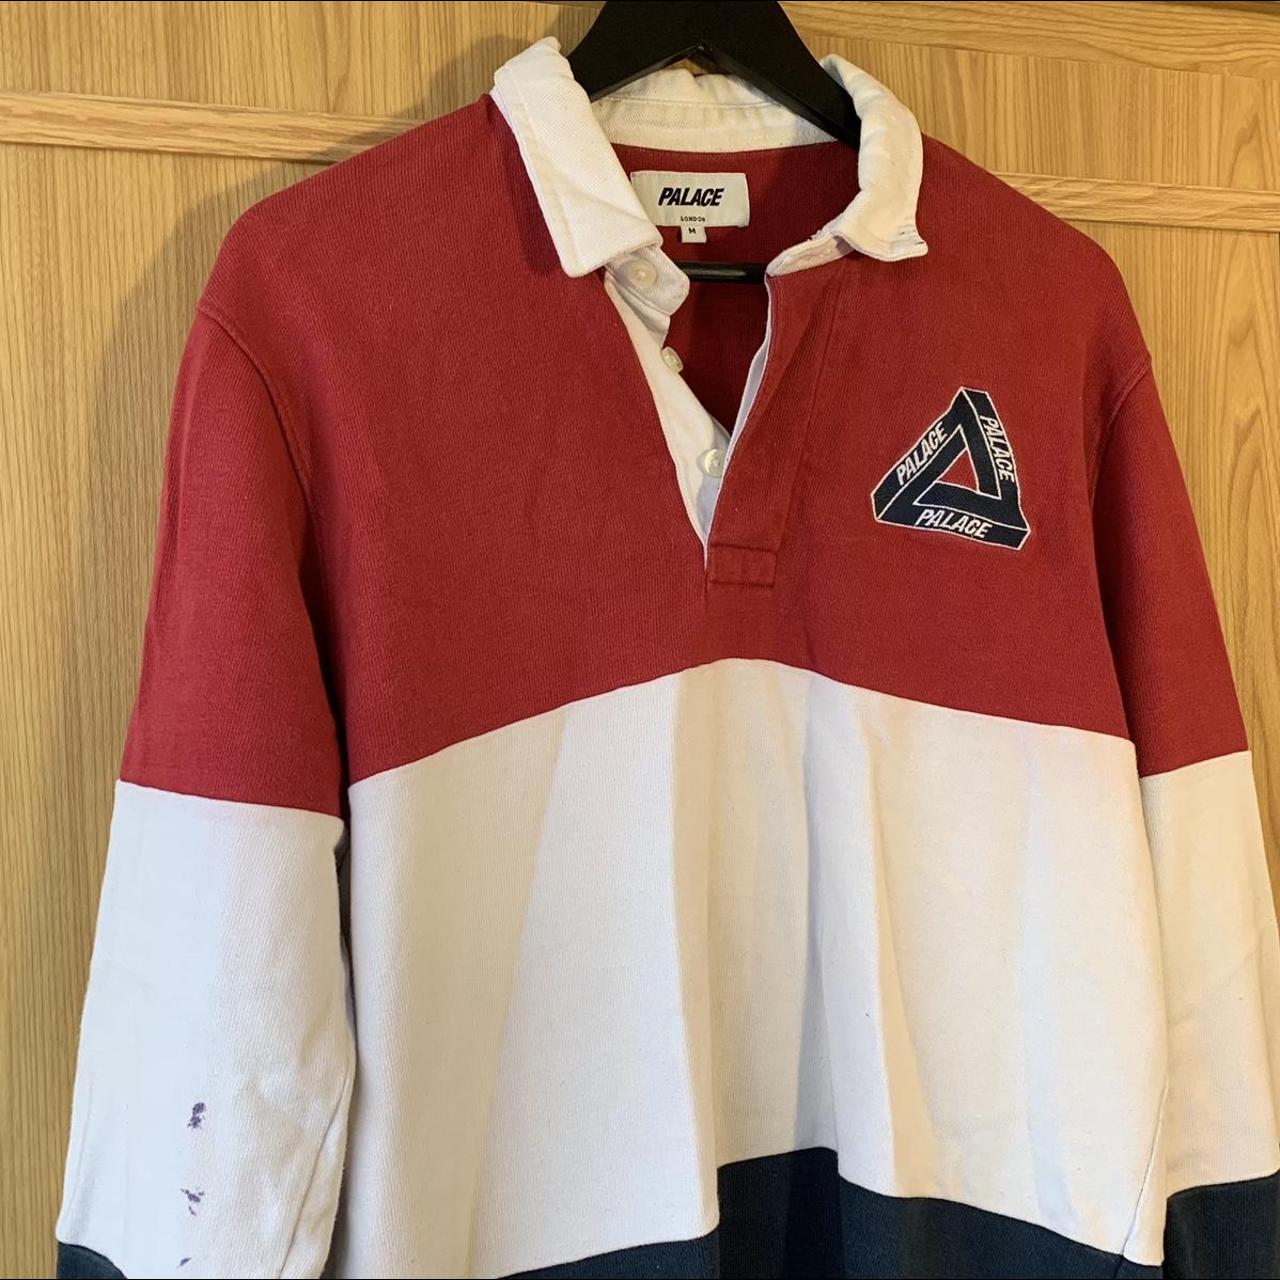 Palace Men's White and Red Polo-shirts | Depop